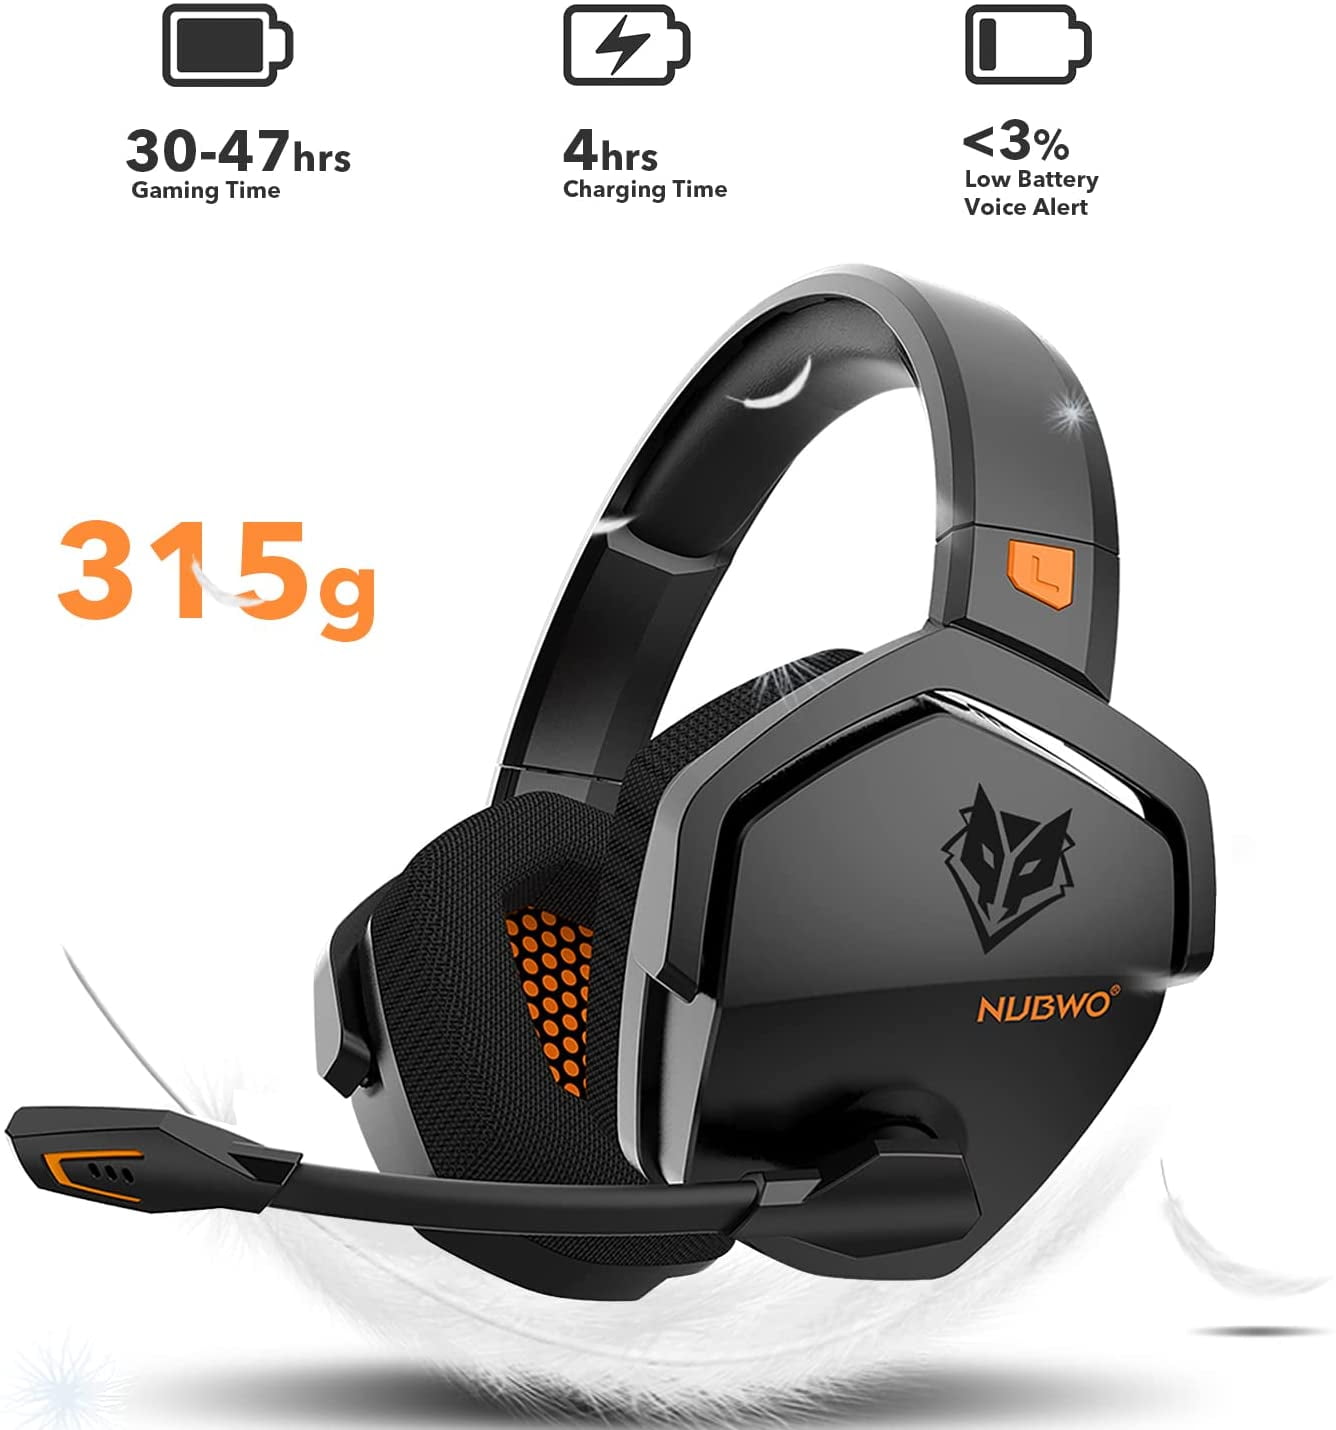 Wireless Gaming Headset with Microphone for PS5, PS4, PC, Mac, 3-in-1 Gamer Headphones Mic, 2.4GHz for PS Console, Bluetooth Mode for Switch, Wired Mode for Controller Walmart.com